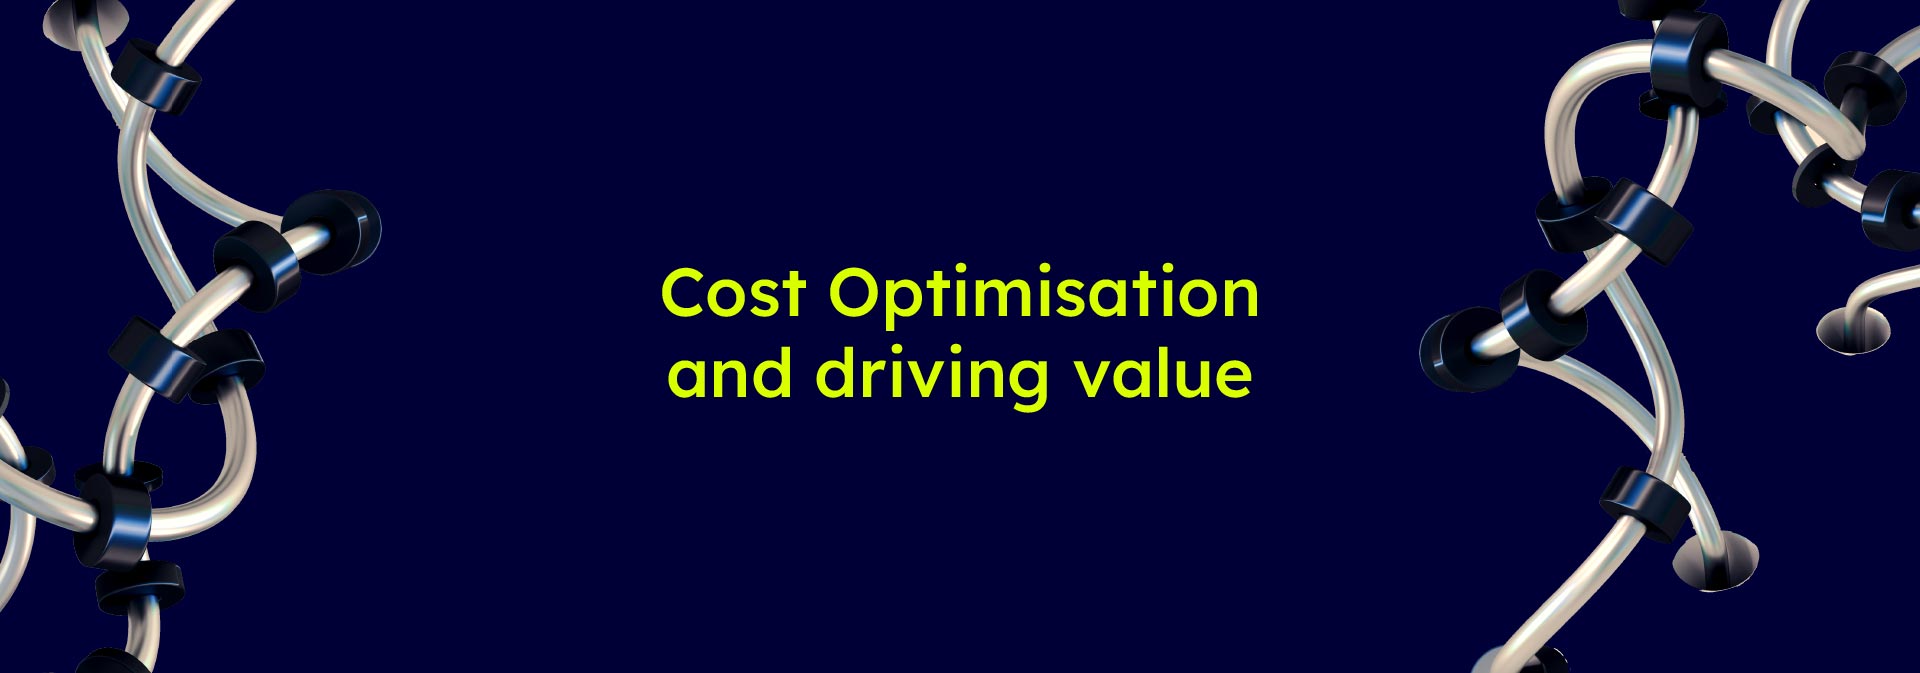 Cost Optimisation and driving value